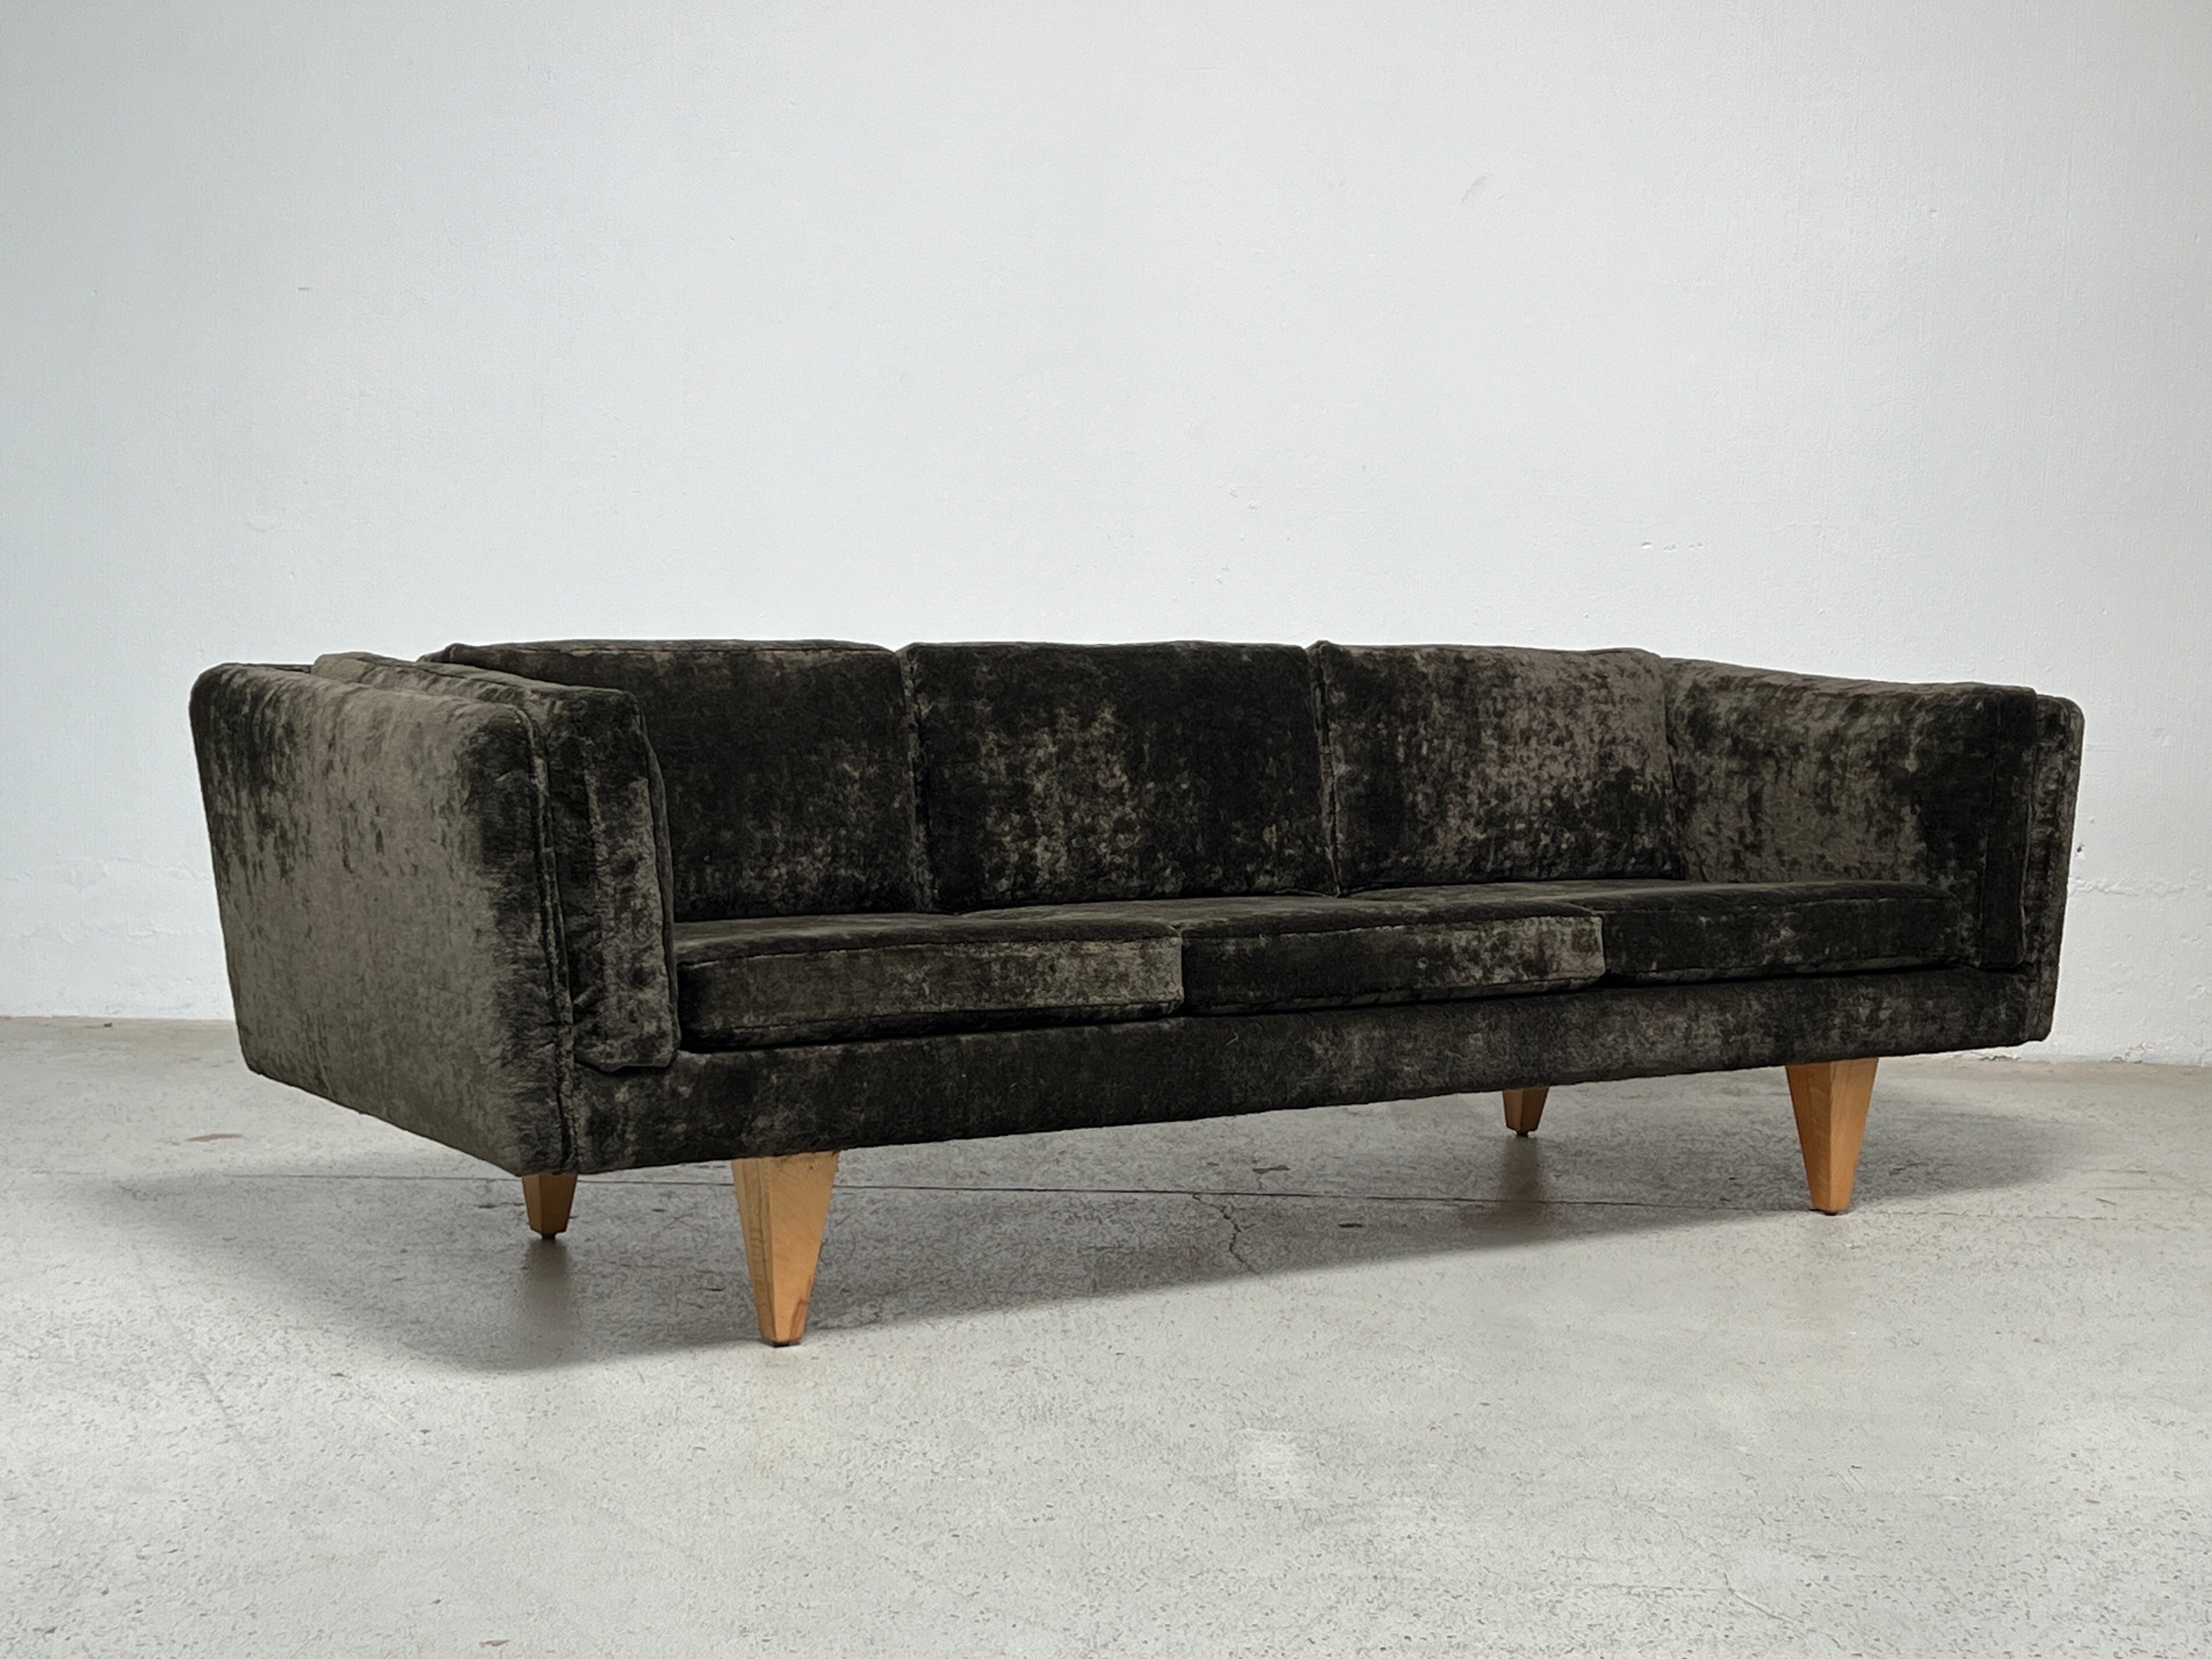 A beautifully restored V11 sofa designed by Illum Wikkelsø. The original birch legs have been refinished and the sofa has been reupholstered in Holly Hunt / Lush / Dusk thick velvet. The back cushions are down filled for a very comfortable sit. 